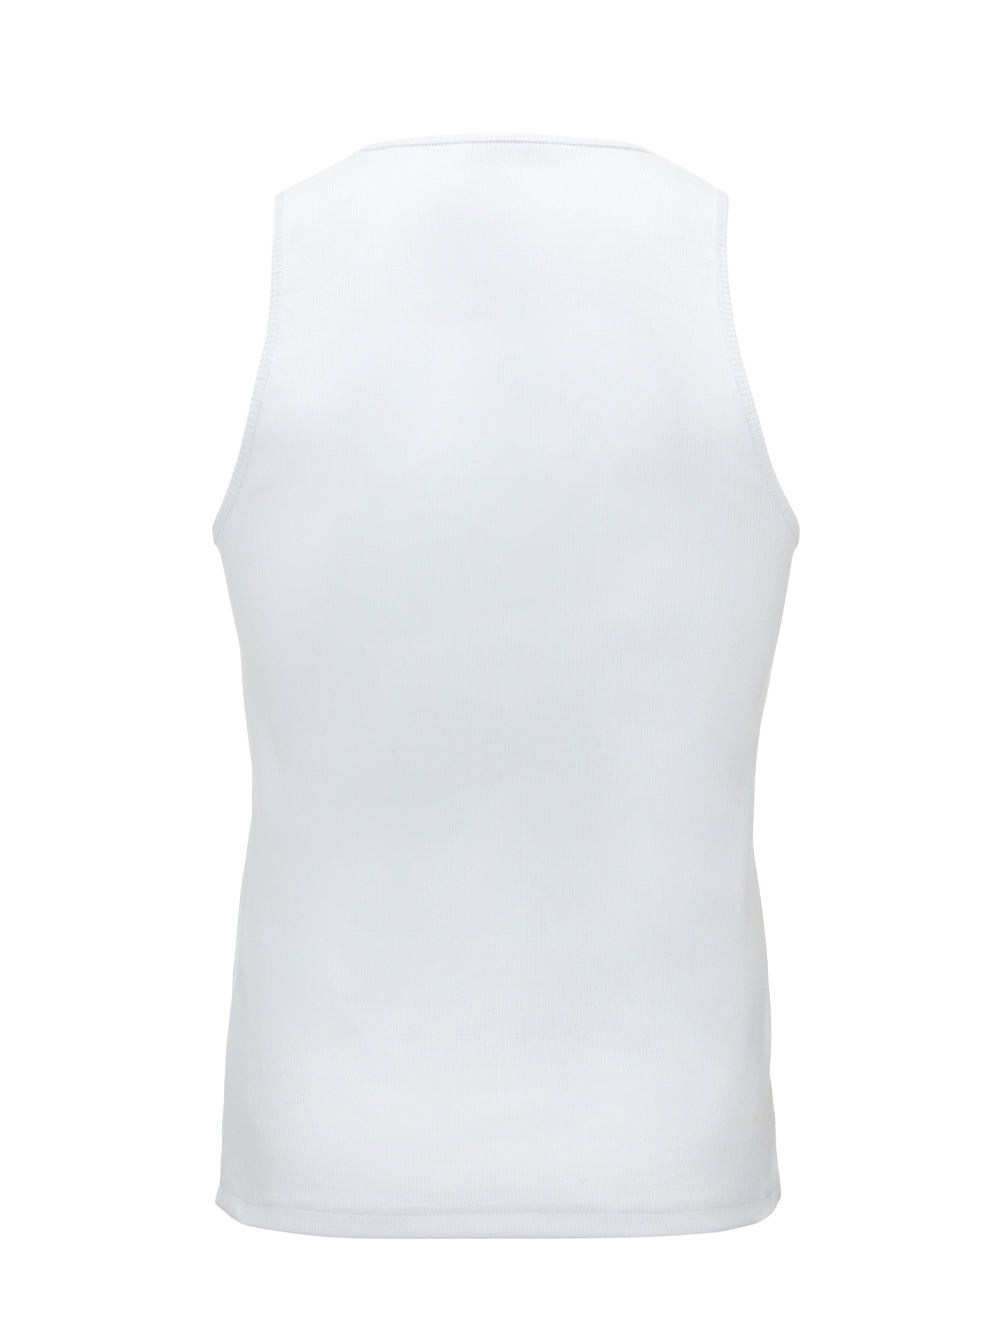 Logo Embroidered Tank Top (White)